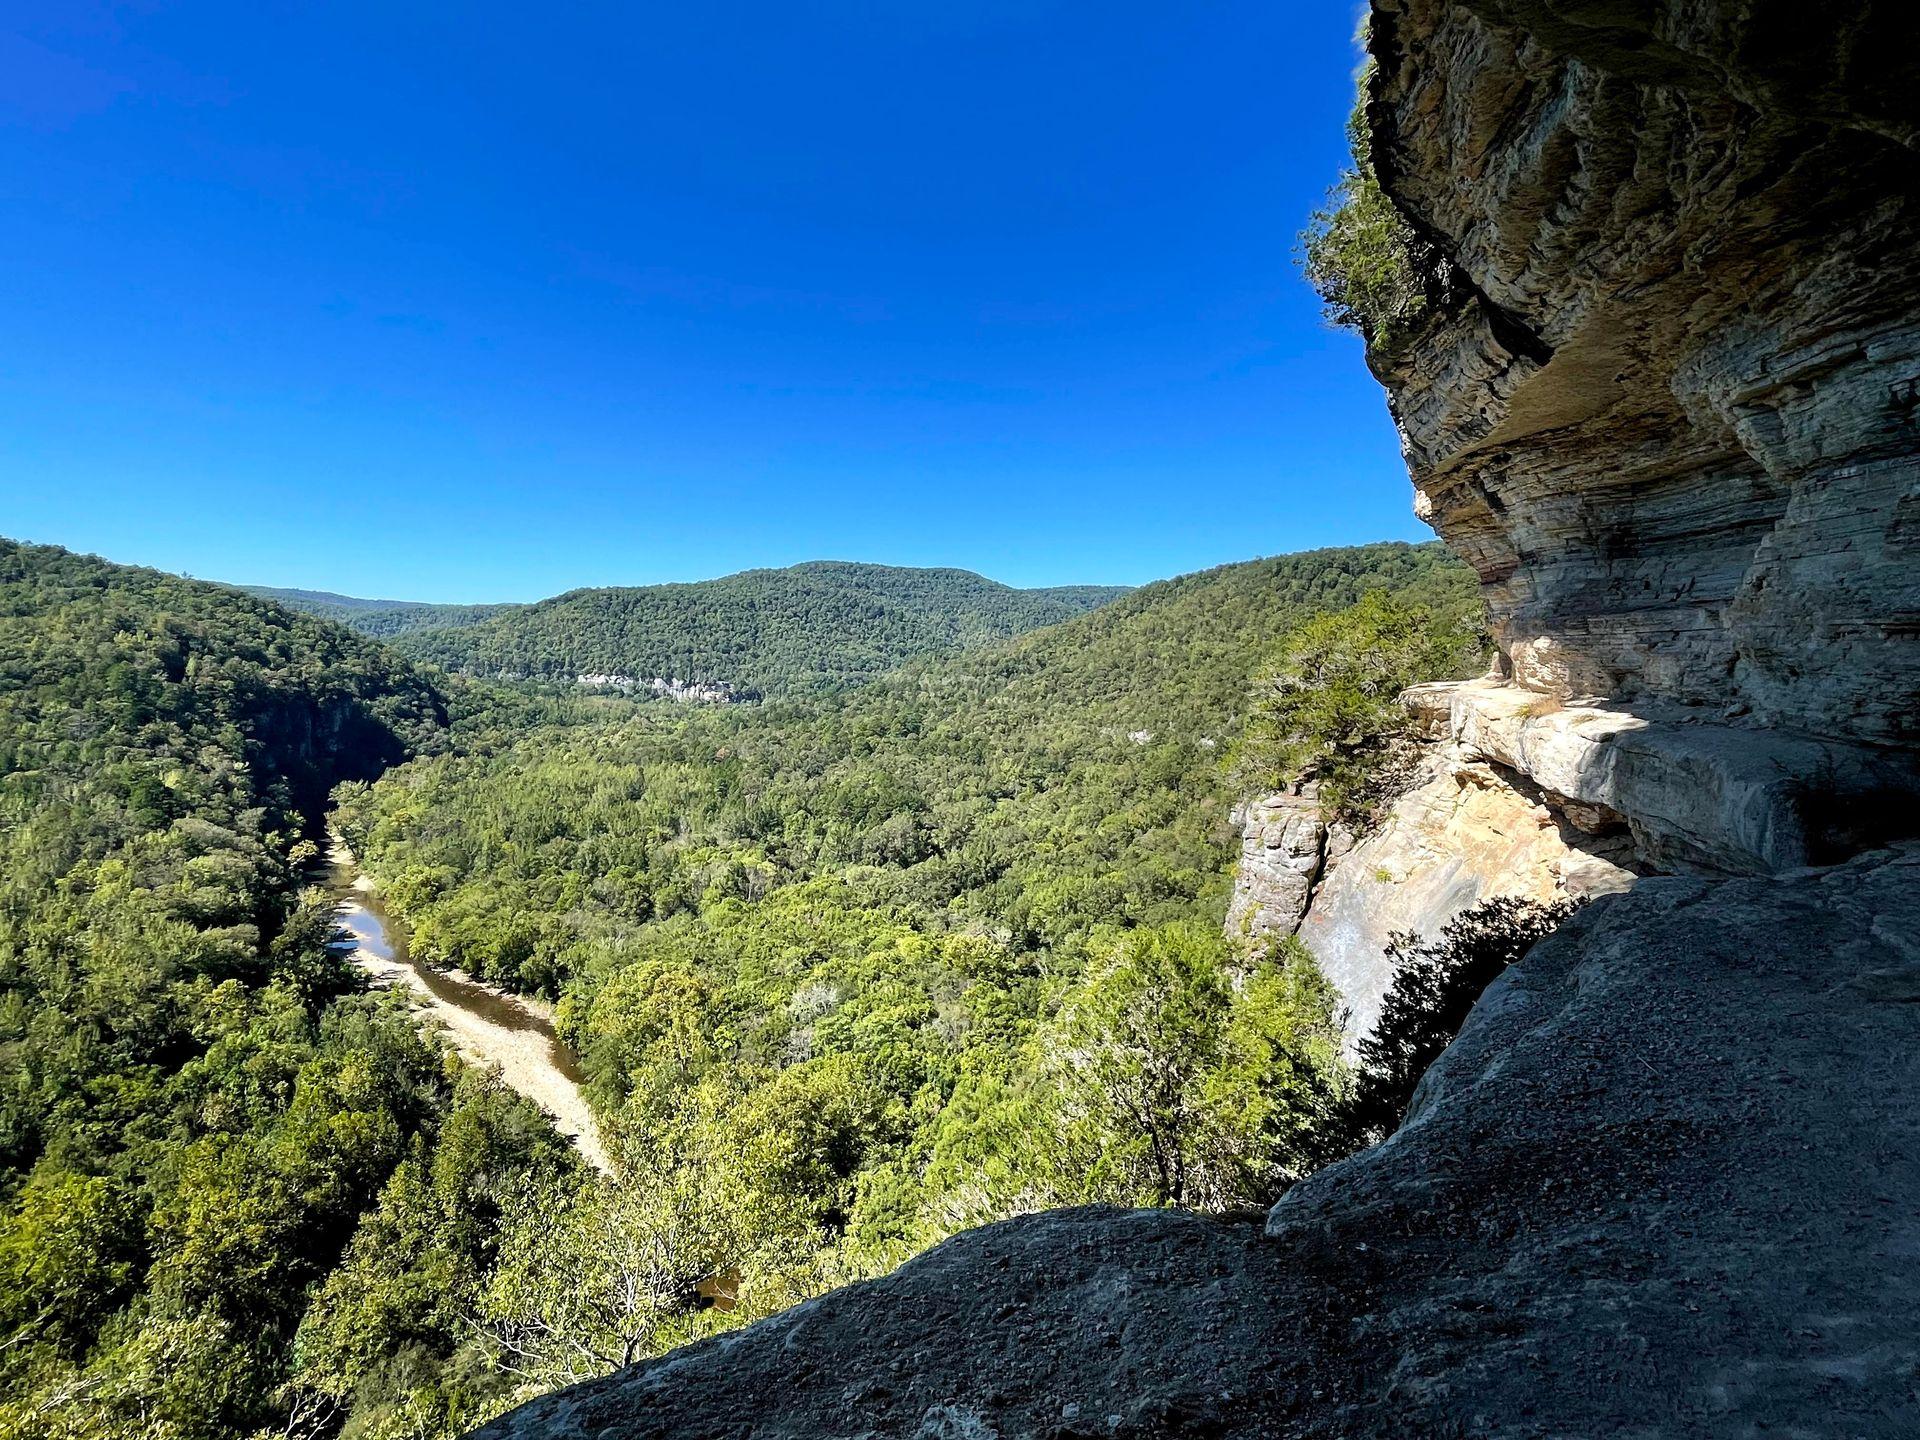 A view of Buffalo National River with the Goat Bluff.